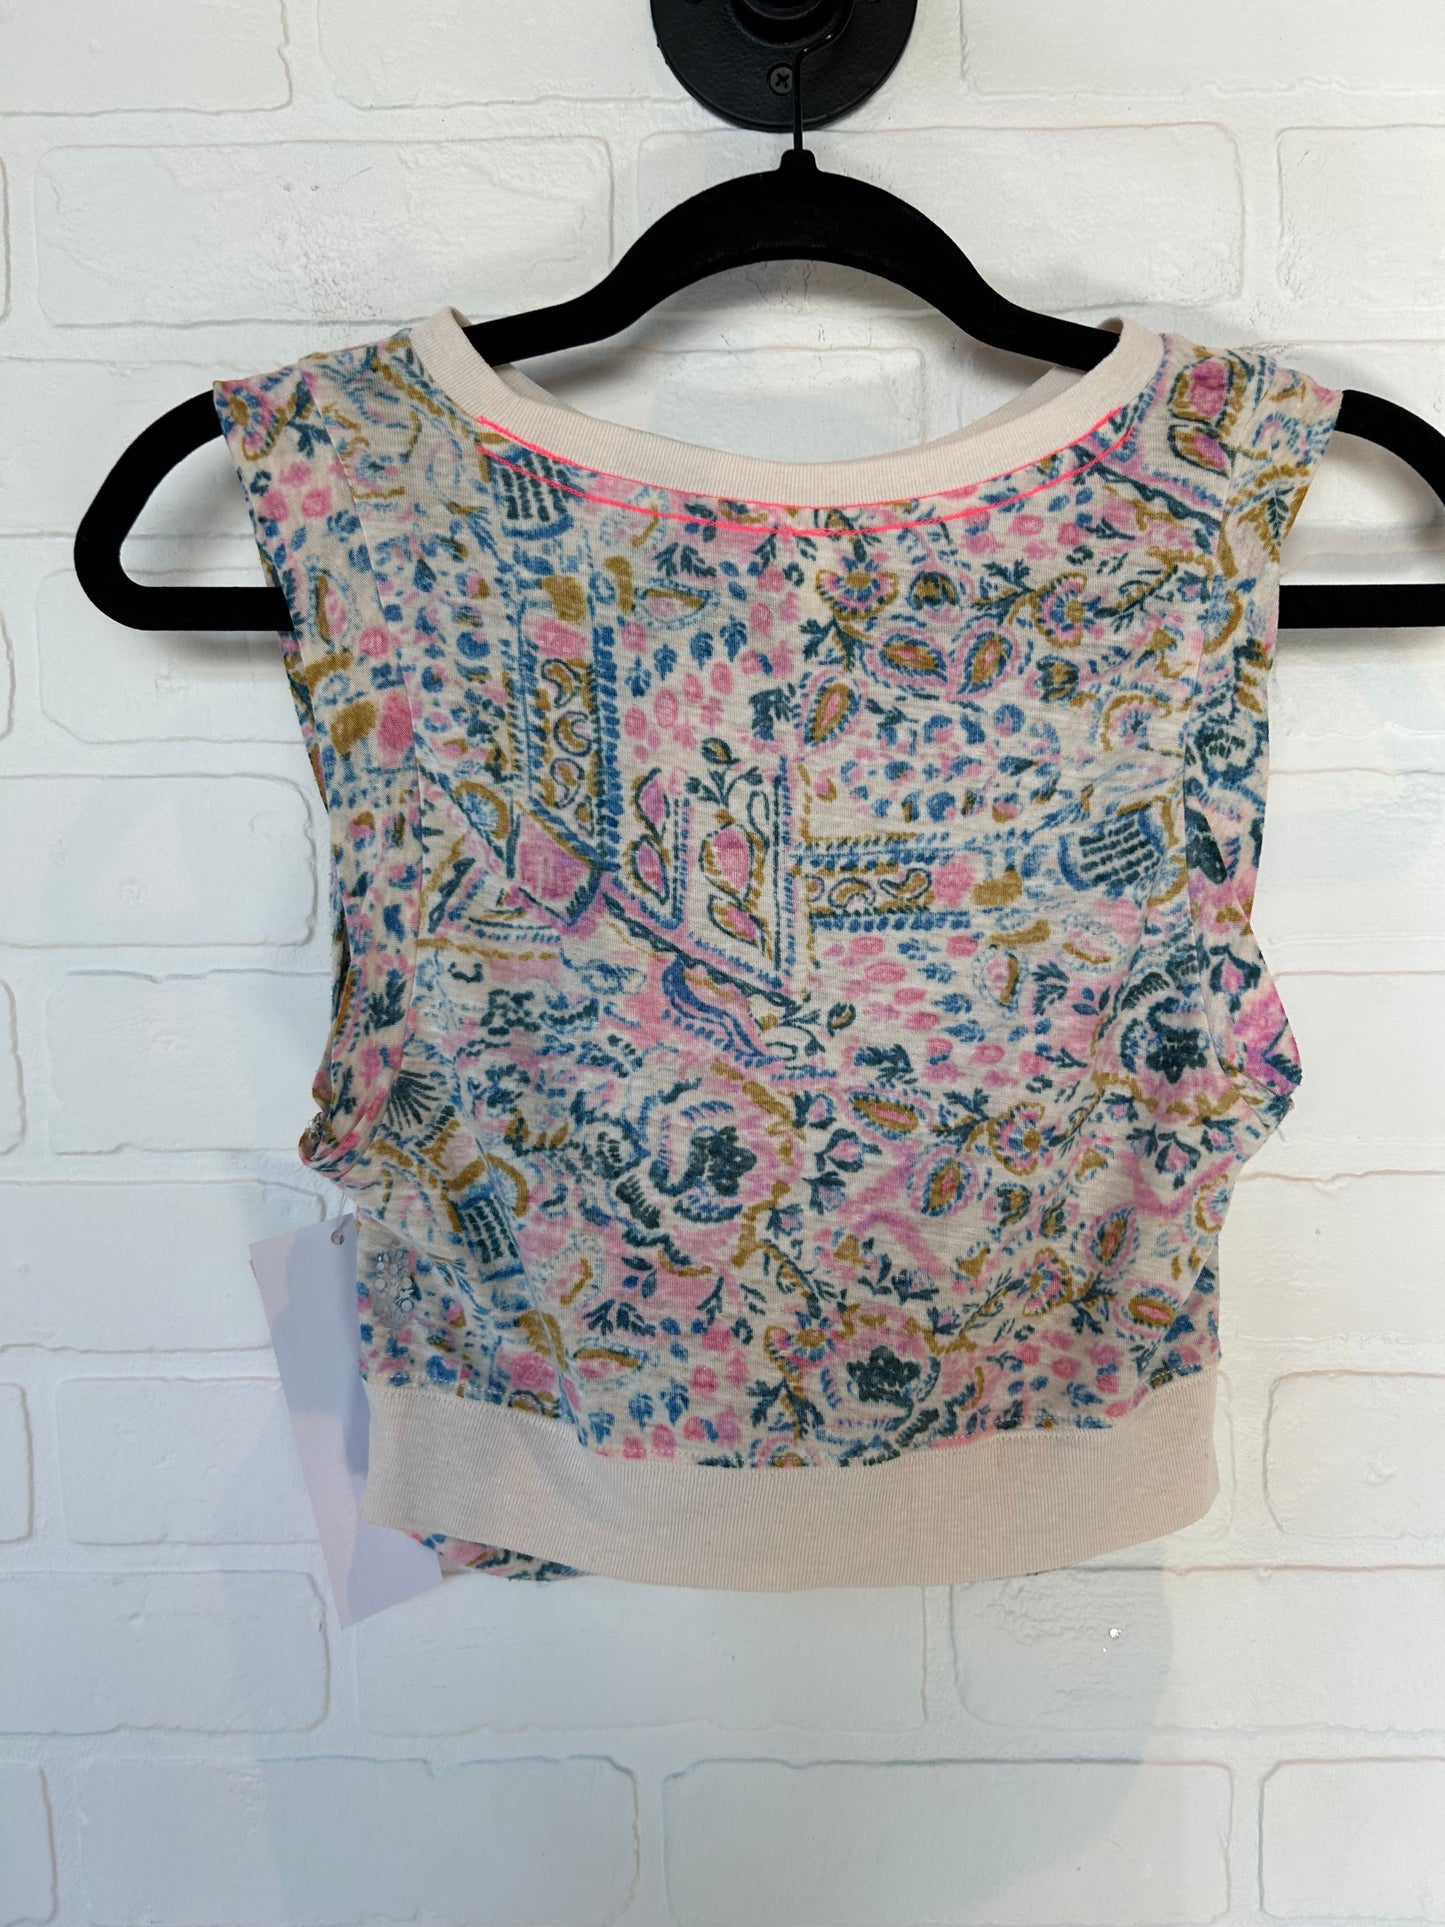 Multi-colored Athletic Top Short Sleeve Free People, Size Xs